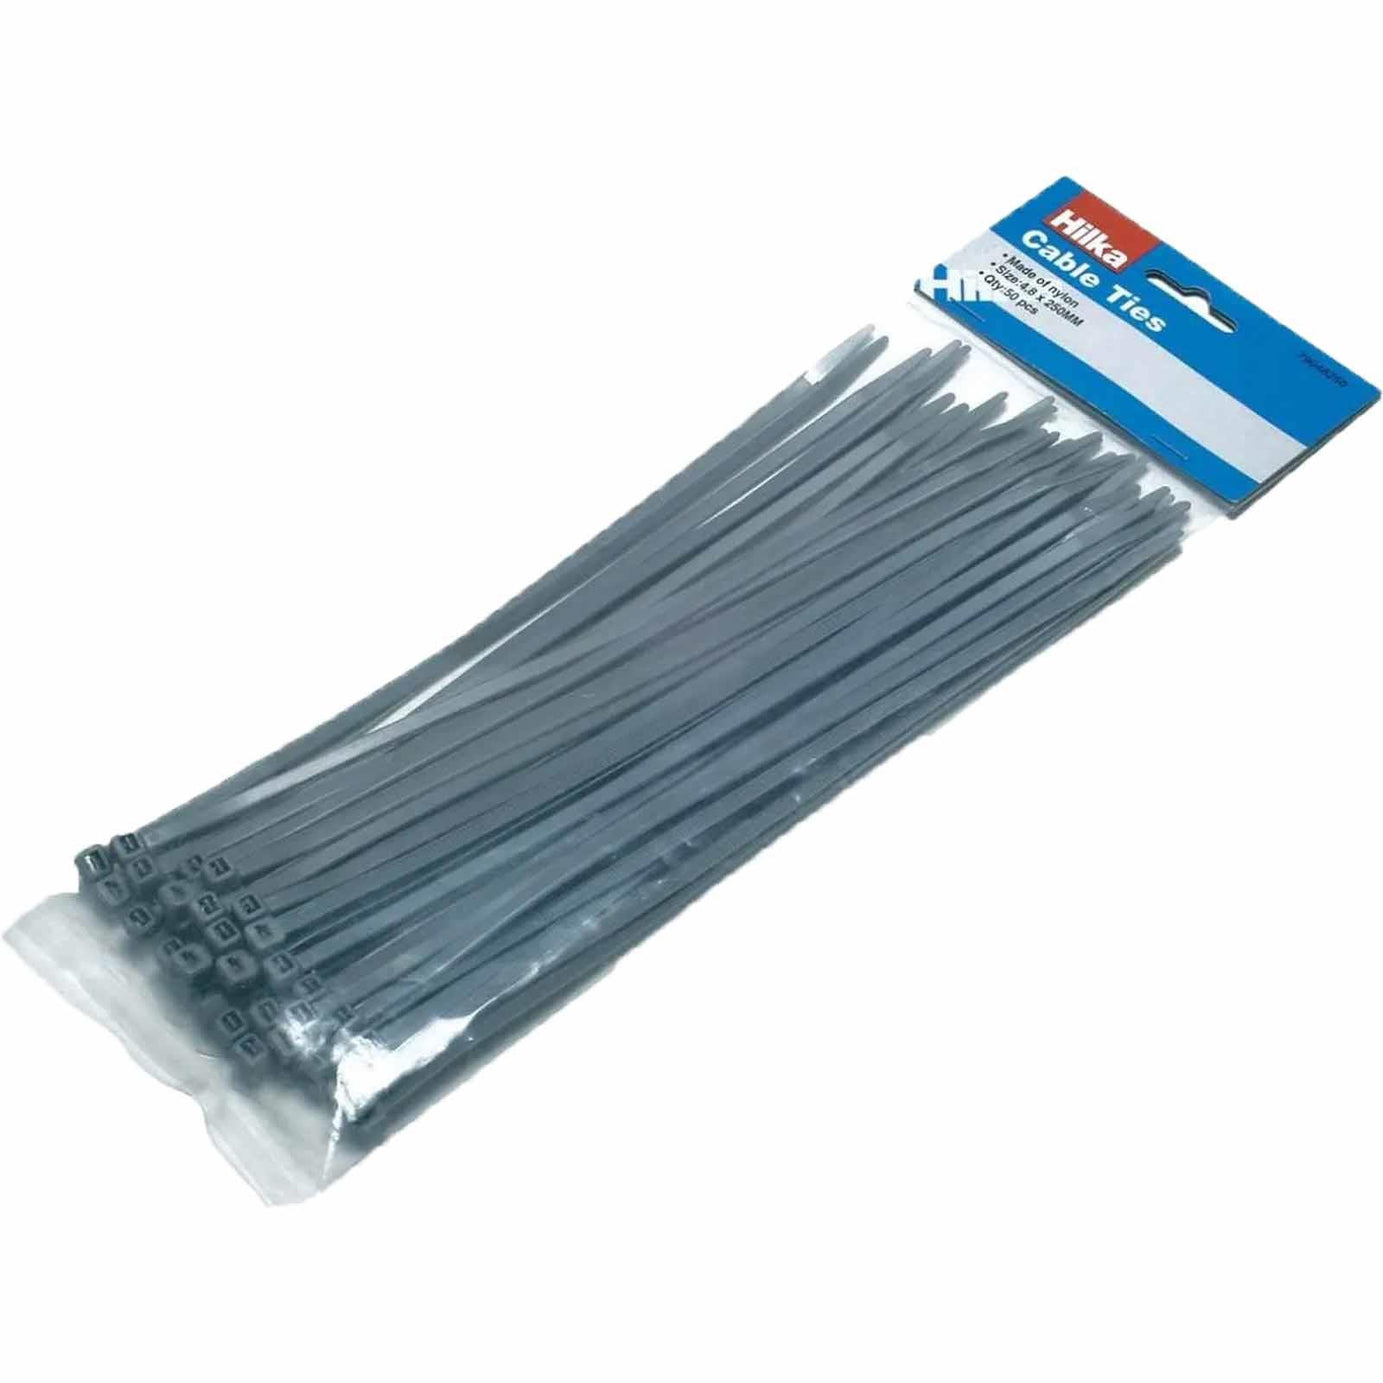 Hilka cable ties 4.5mm x 250mm